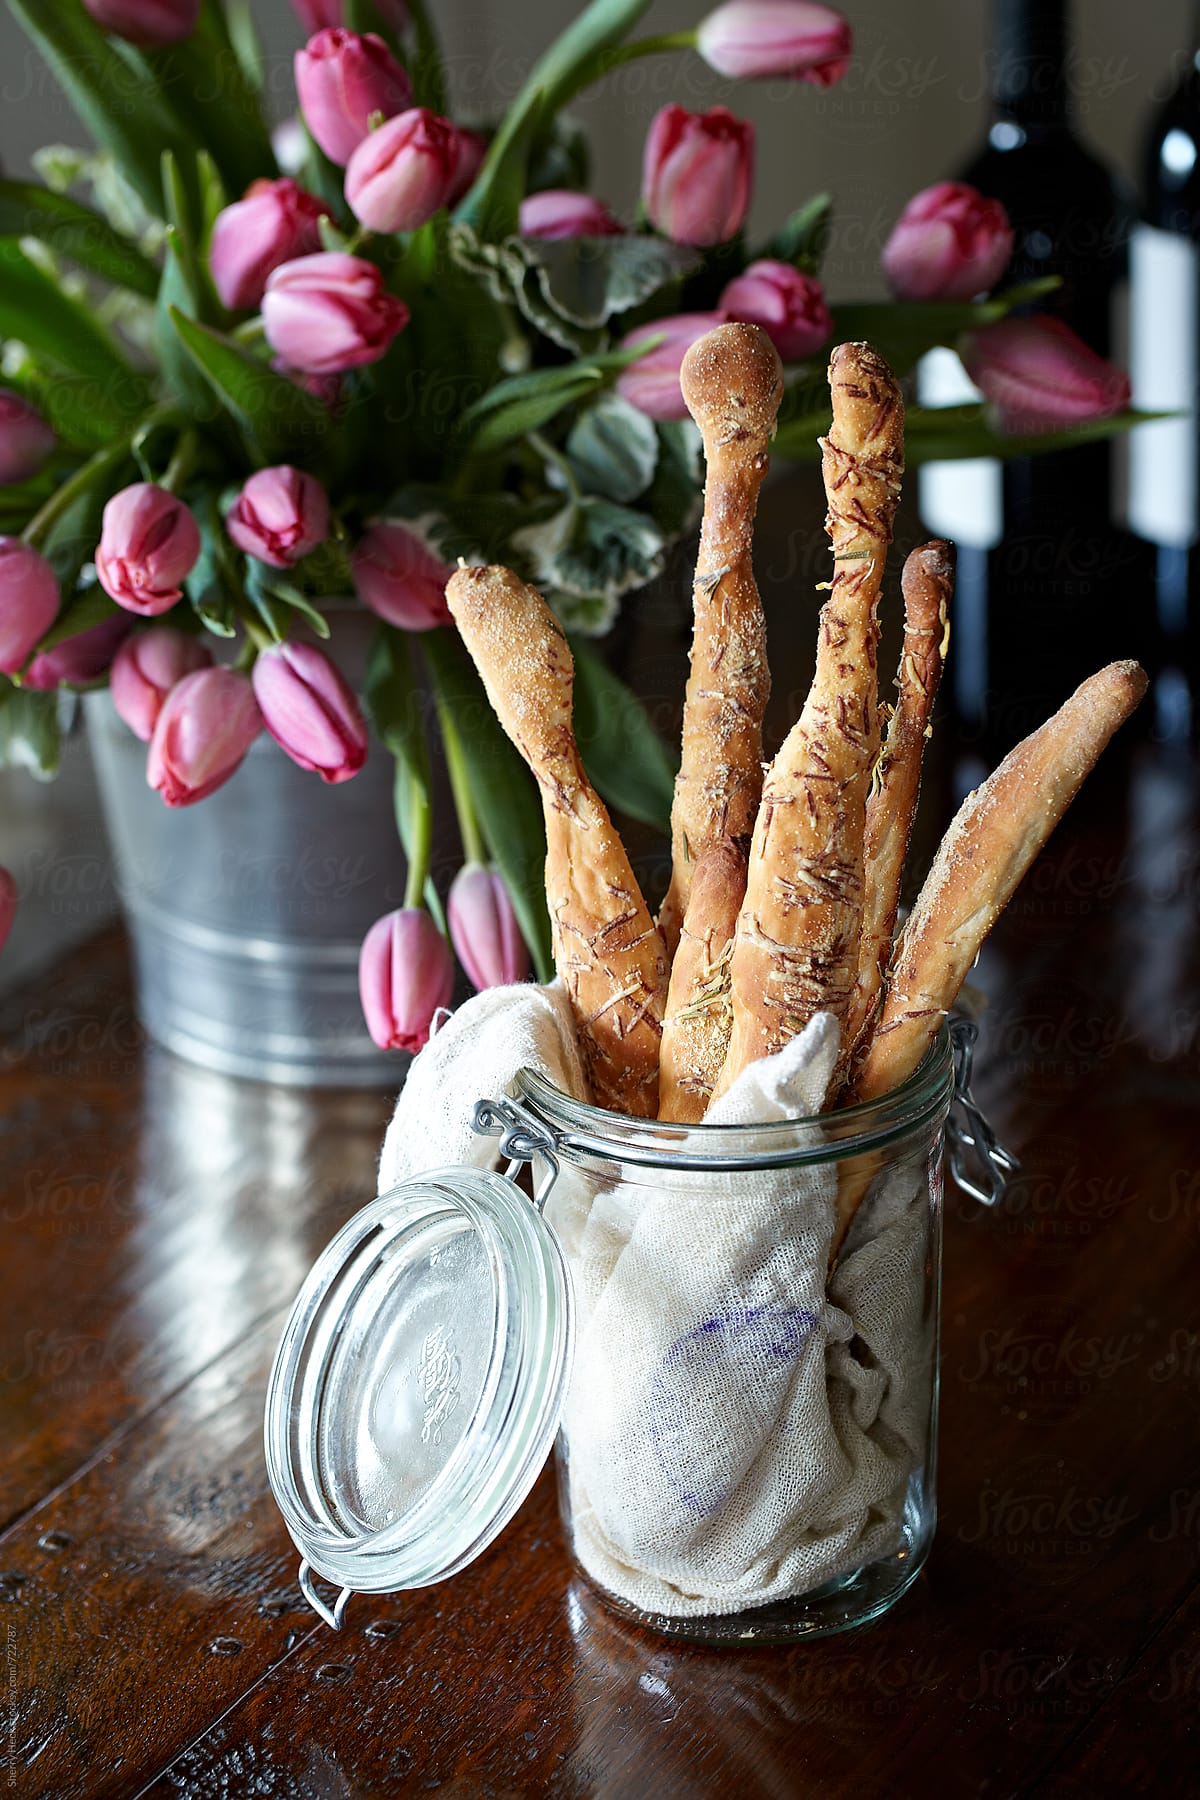 Handmade breadsticks in a jar on a dark table with tulips and wine